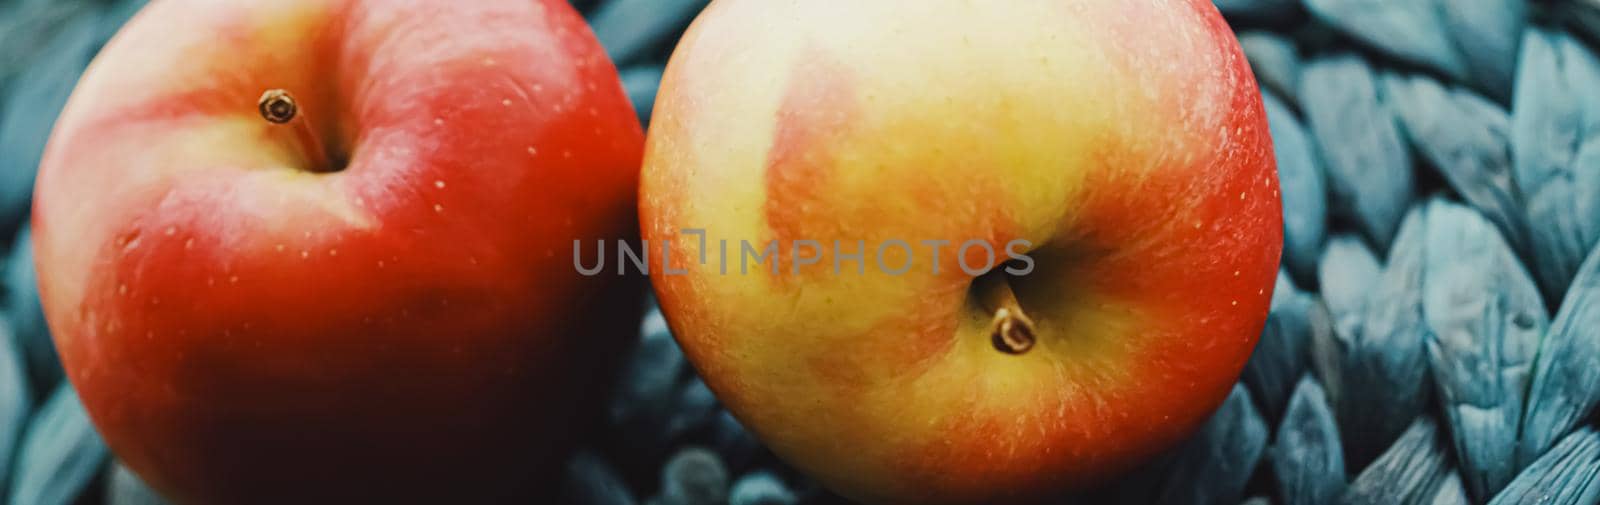 Two fresh ripe small apples, fruits and organic food concept